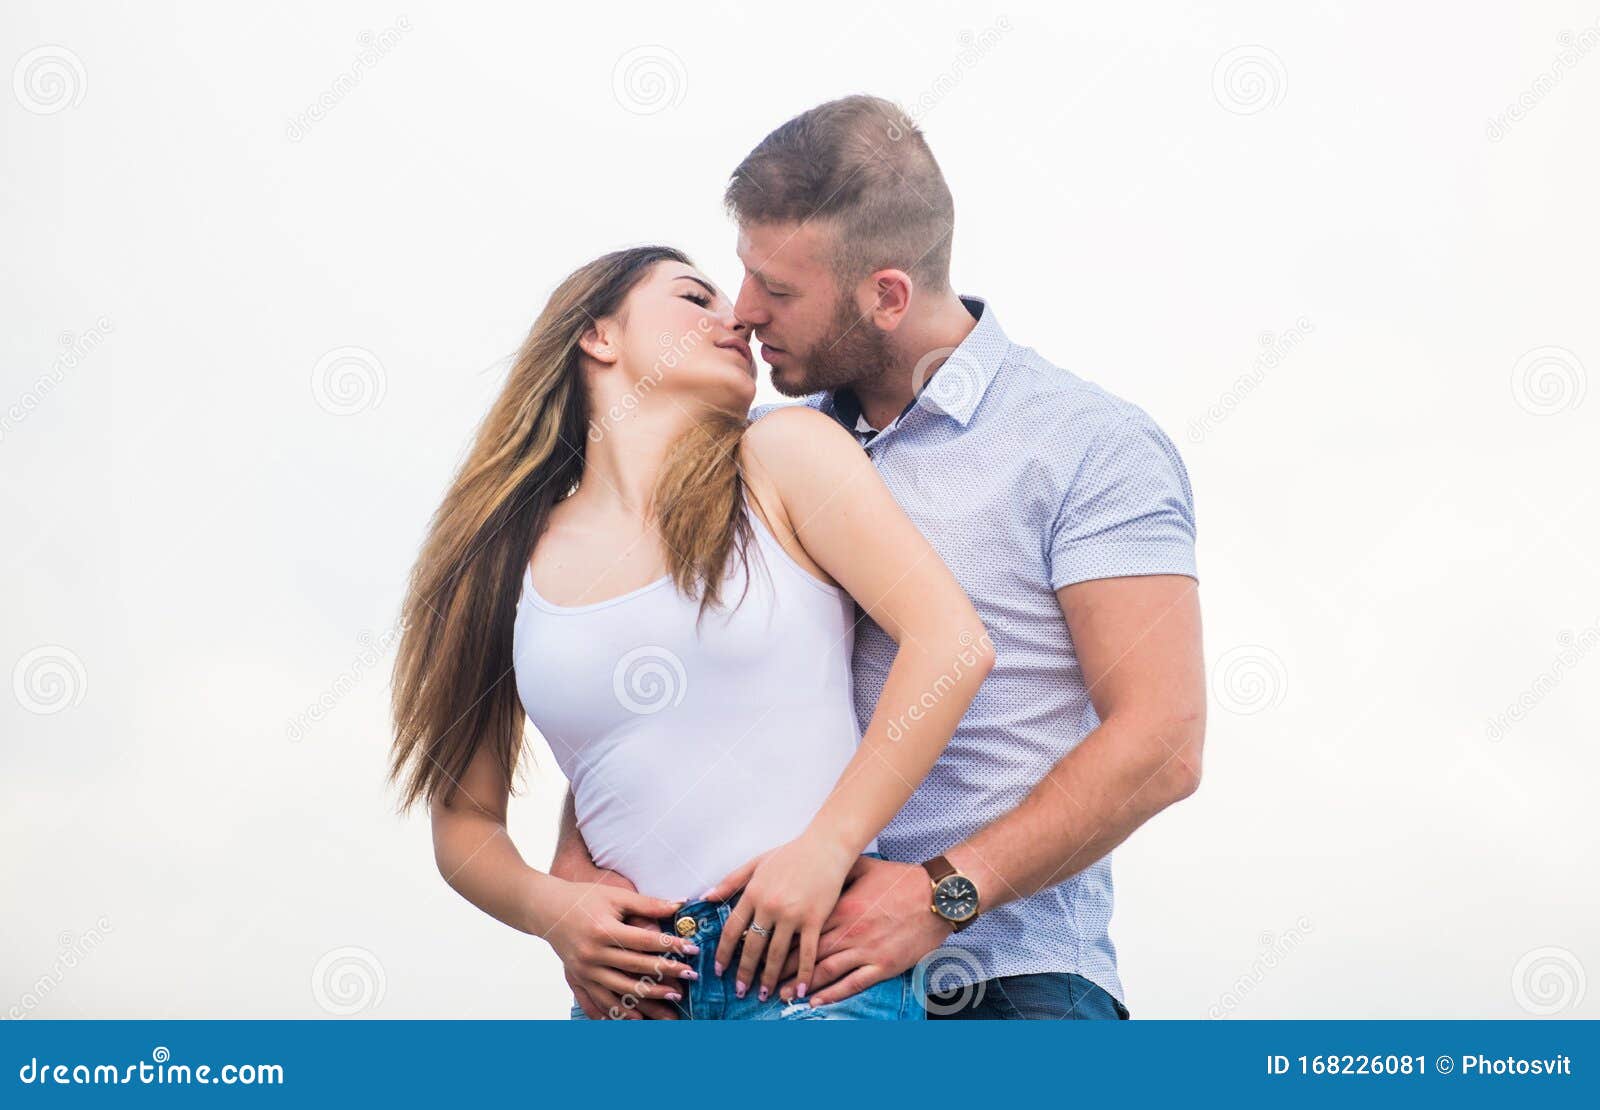 Couple Goals Concept. Man and Woman Cuddle Nature Background ...